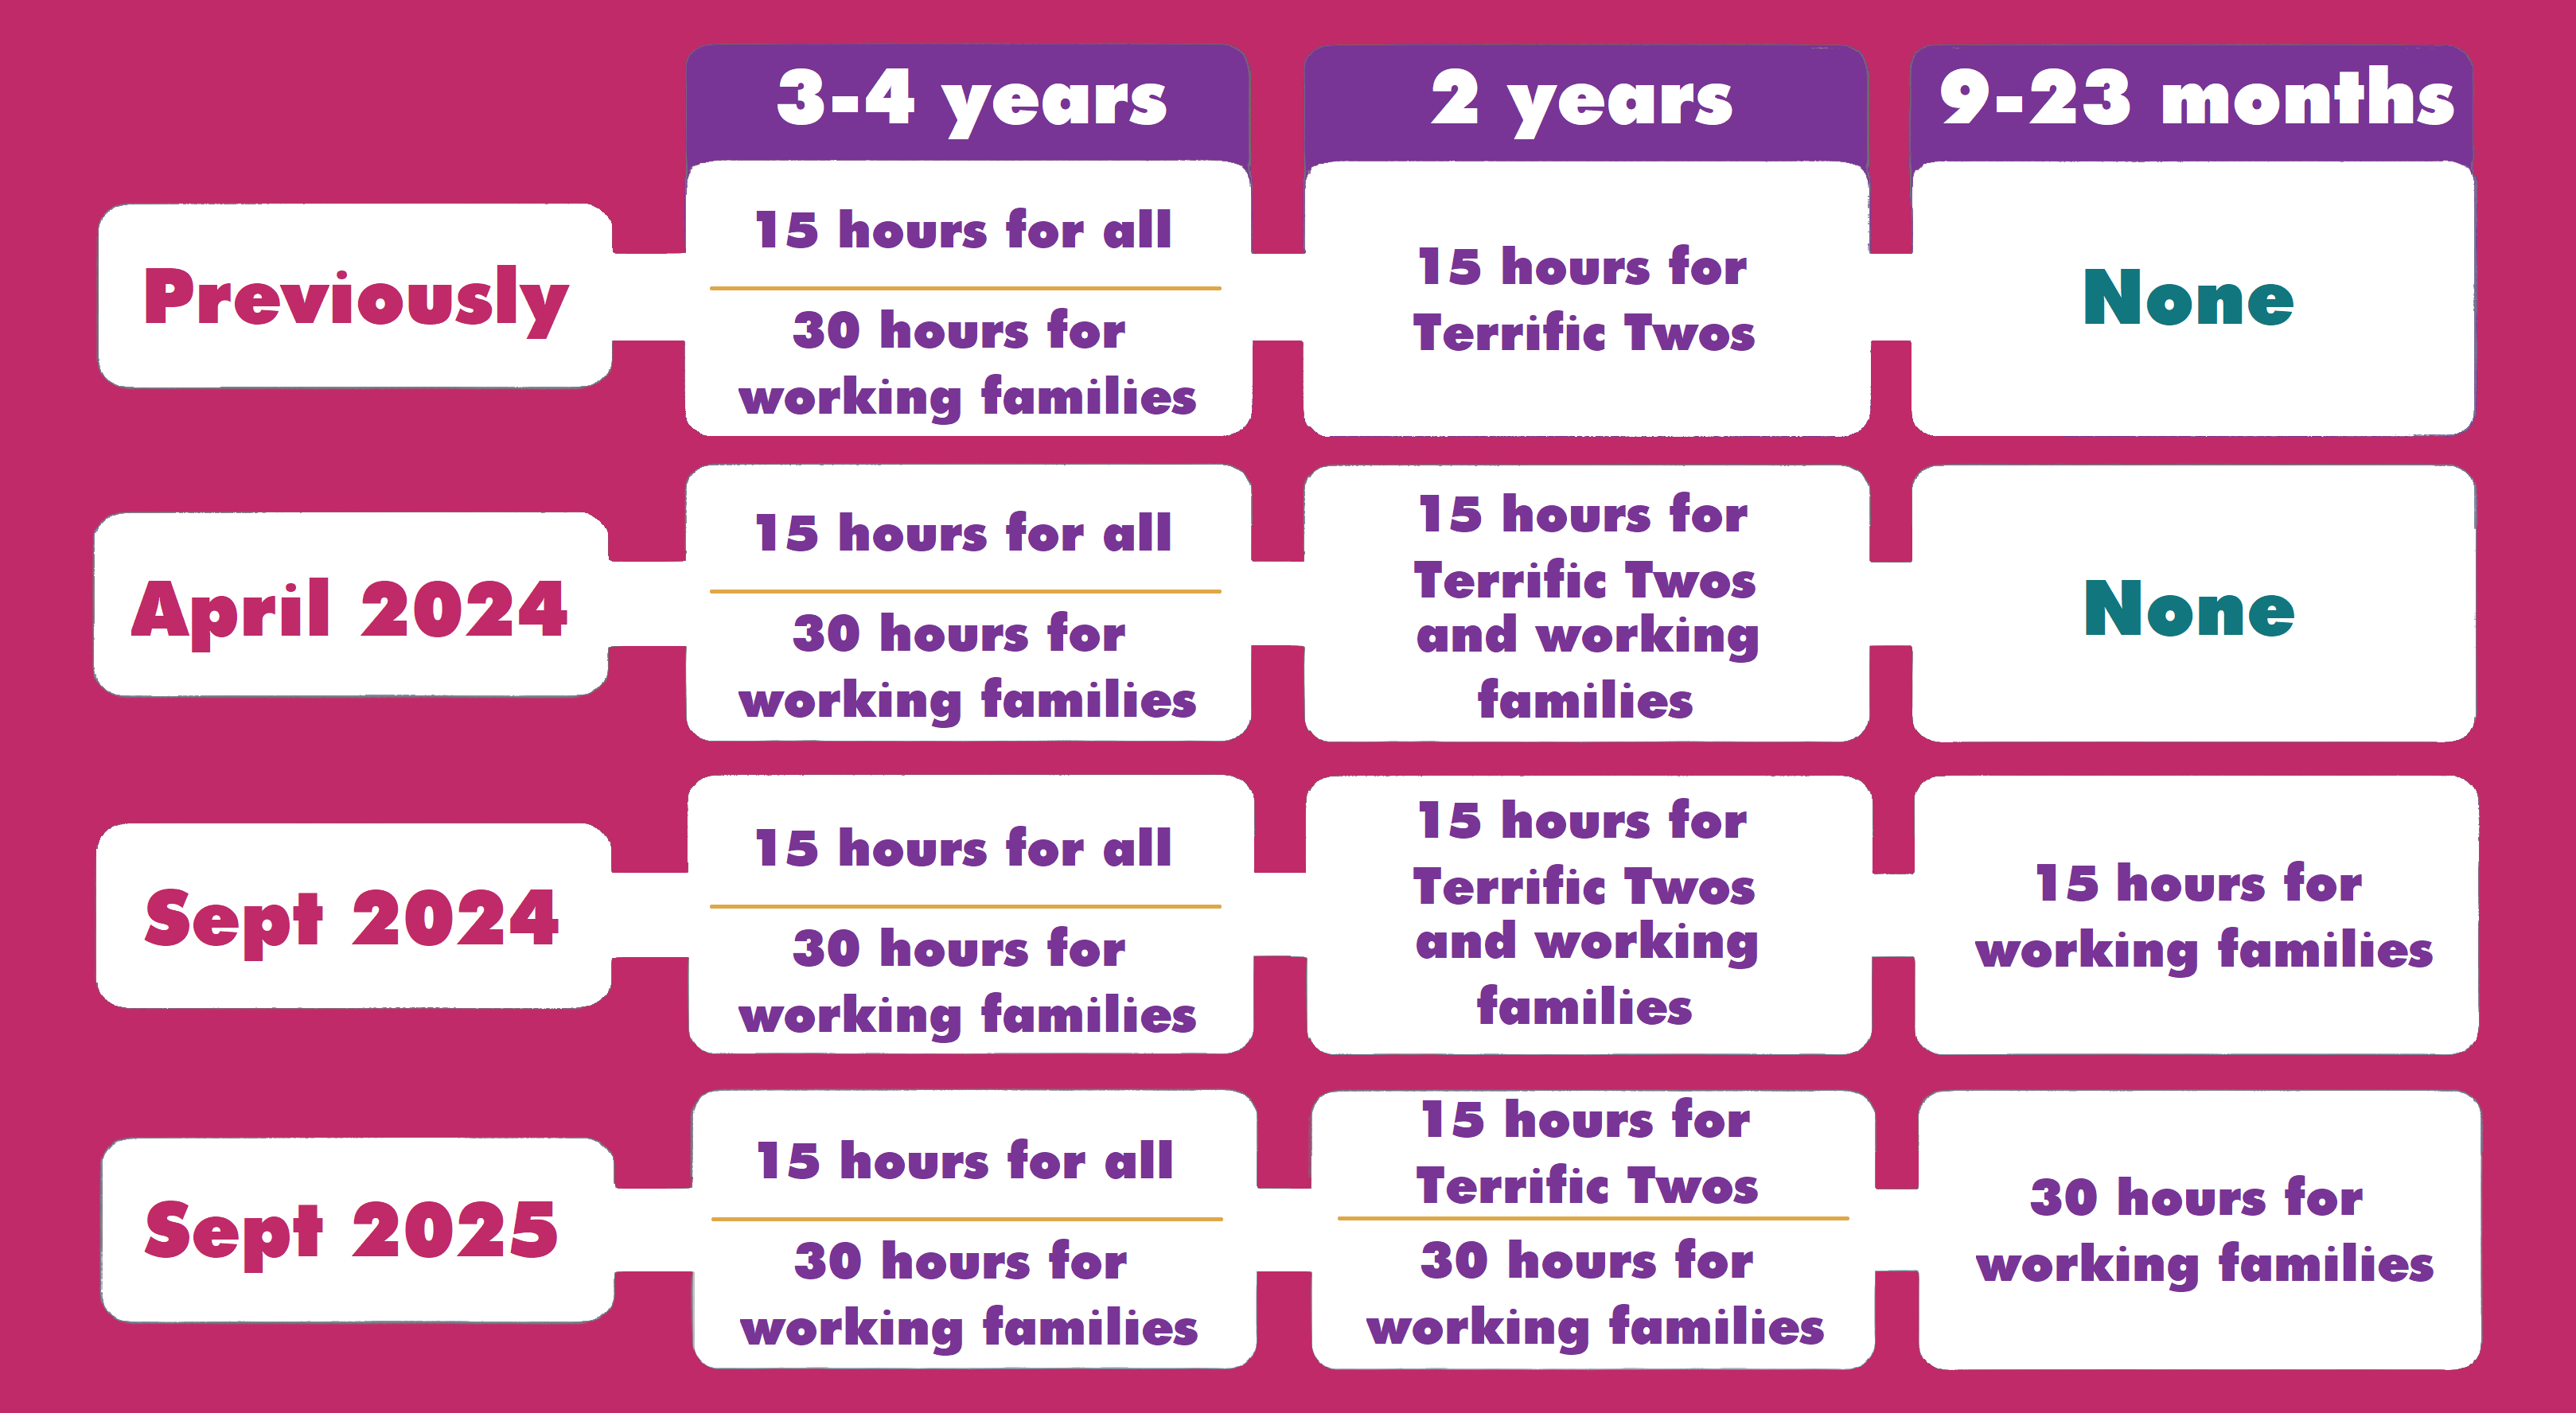 for 3 to 4 year olds, 15 hours for all and 30 hours for working families. for 2 year olds, 15 hours for terrific twos previously, working families are entitled to 15 hours from April 2024 and 30 hours for working families from September 2025; 9 to 23 month olds from working families entitled to 15 hours from September 2024 and 30 hours from September 2025